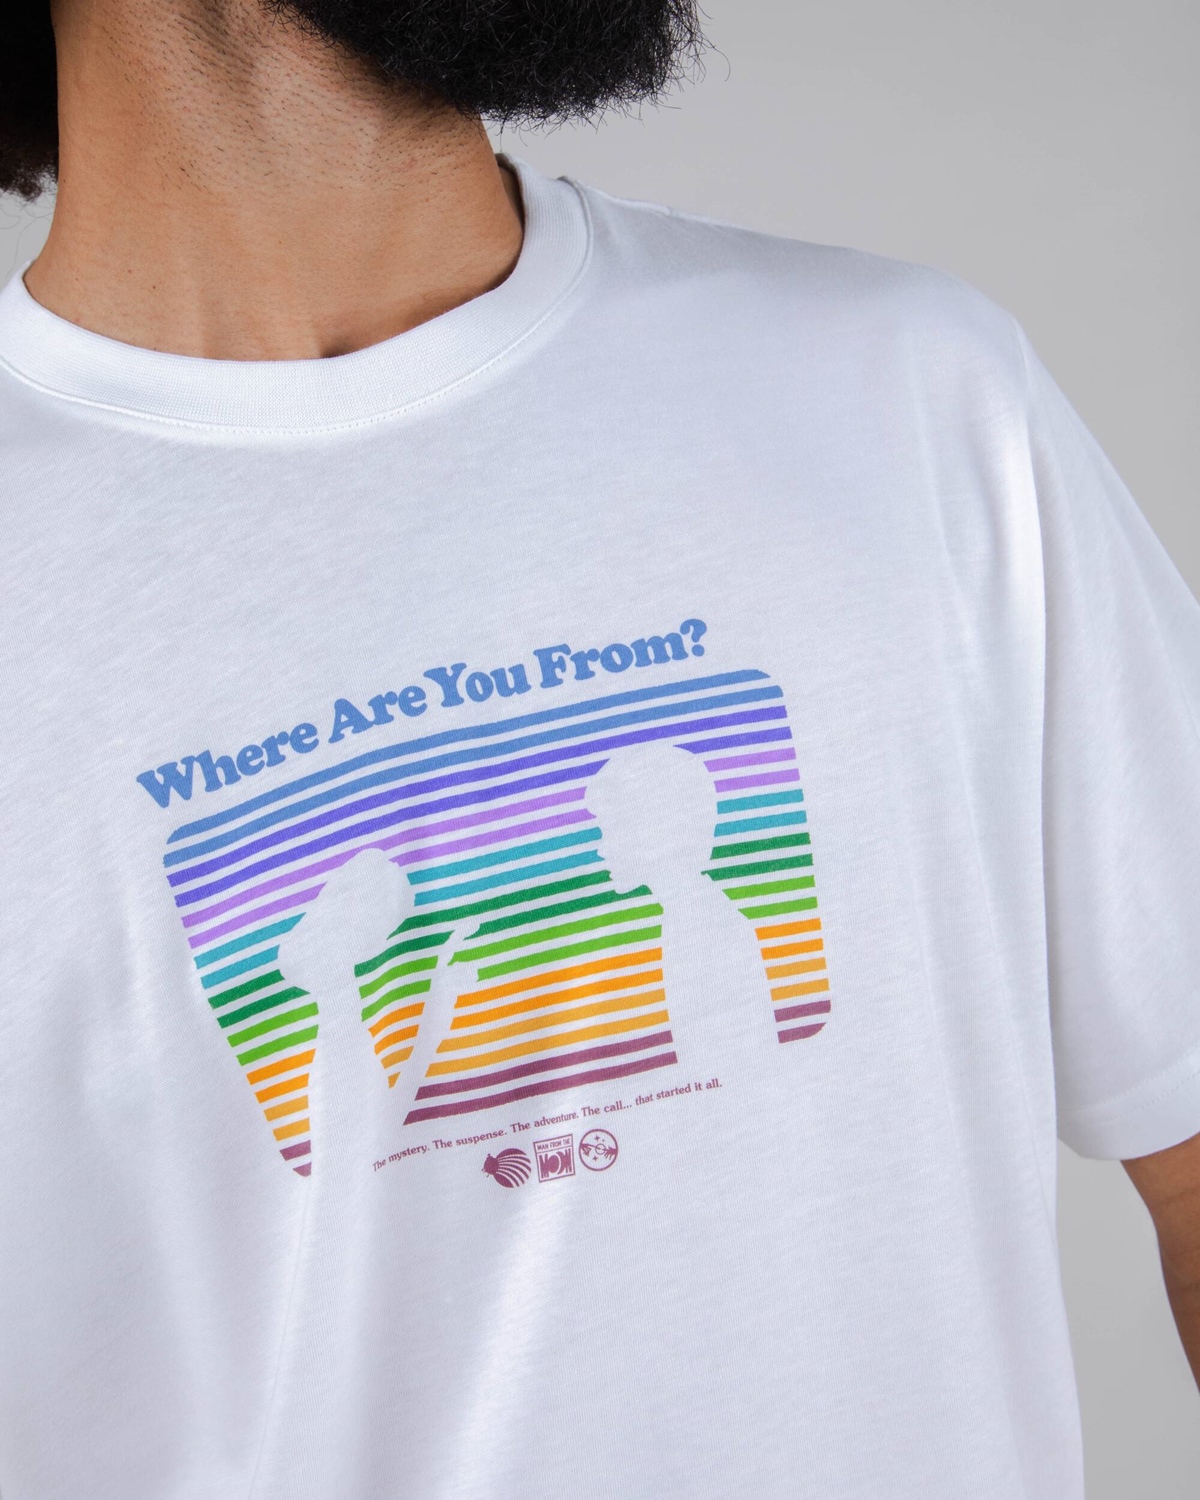 BRAVA E.T. WHERE ARE YOU FROM? T-SHIRT